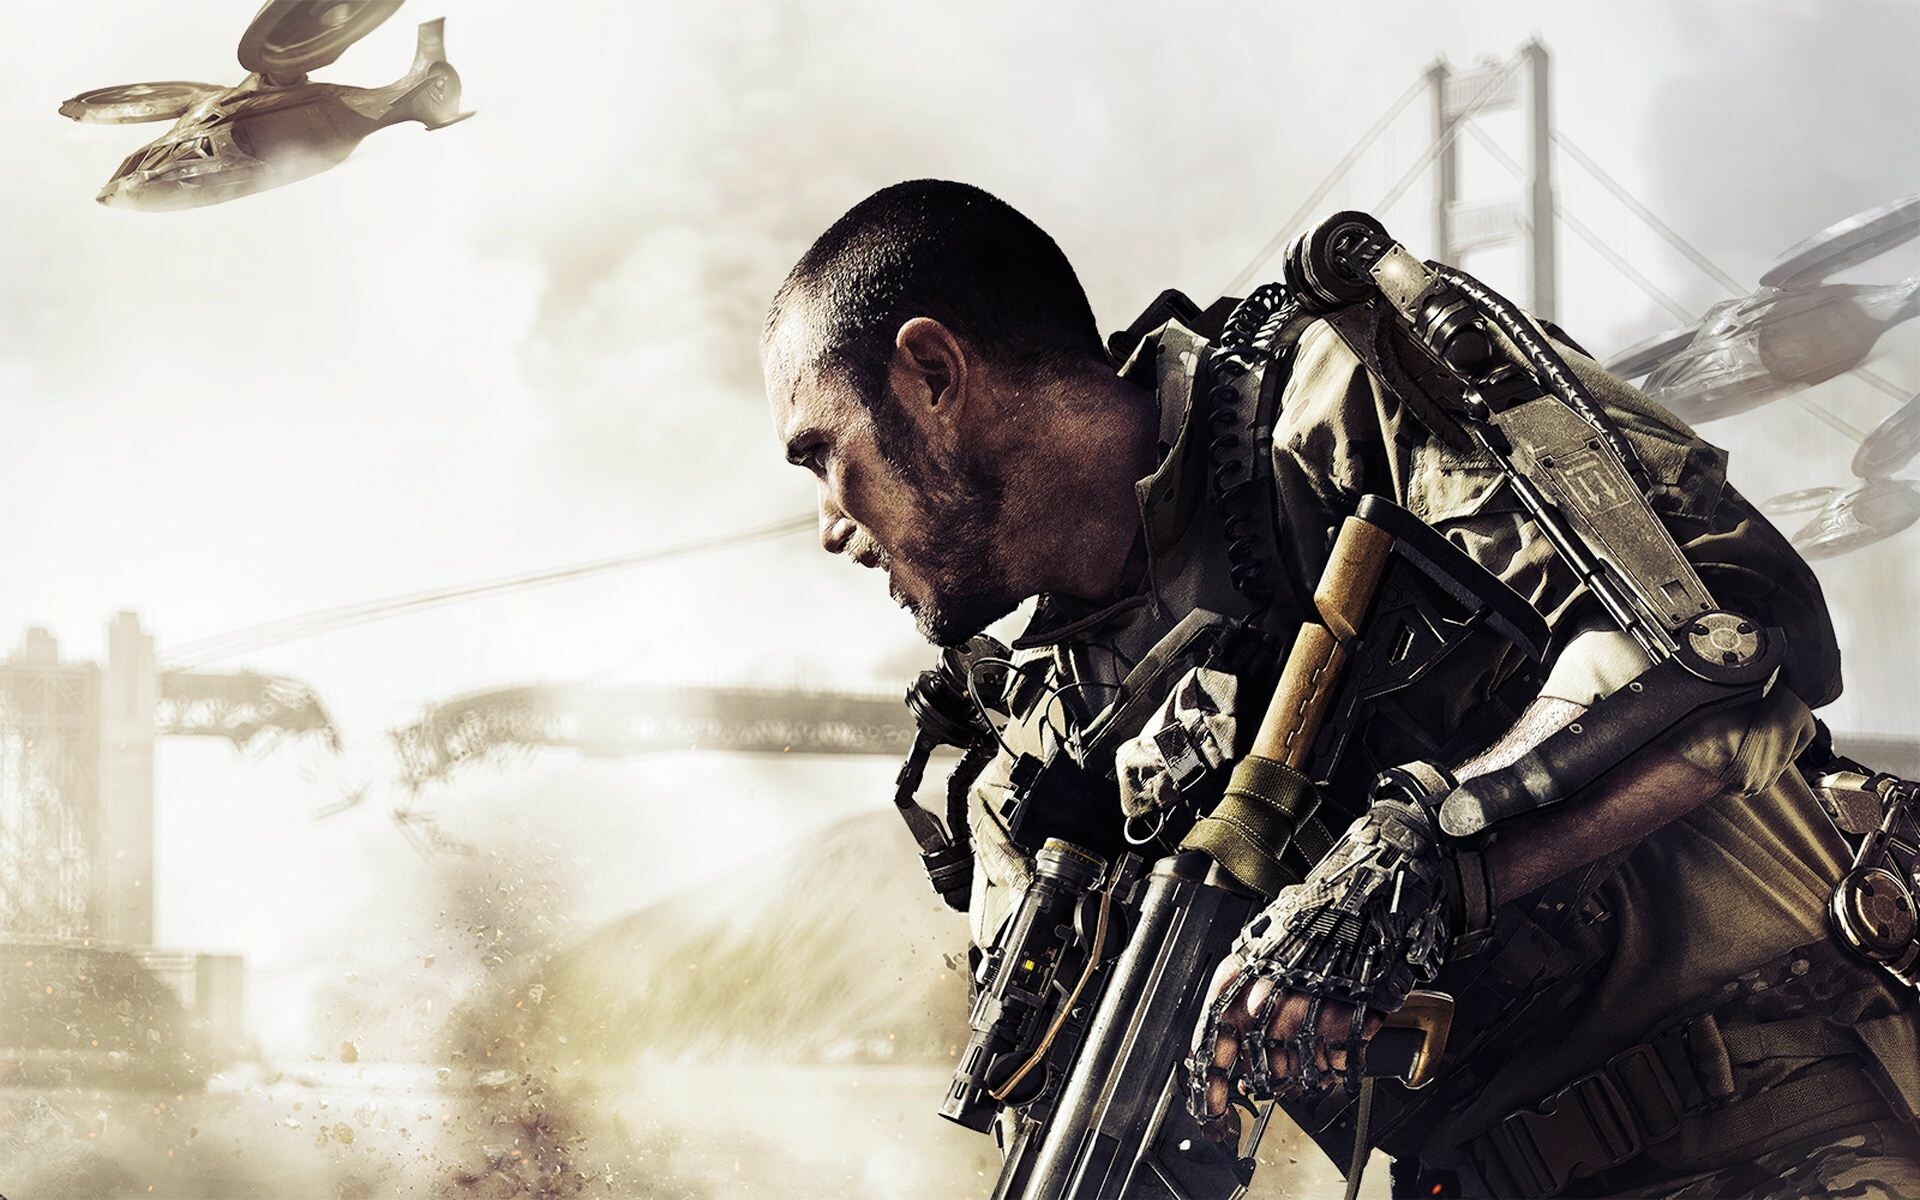 Call of Duty: CoD, The fourth best-selling video game franchise of all time. 1920x1200 HD Background.